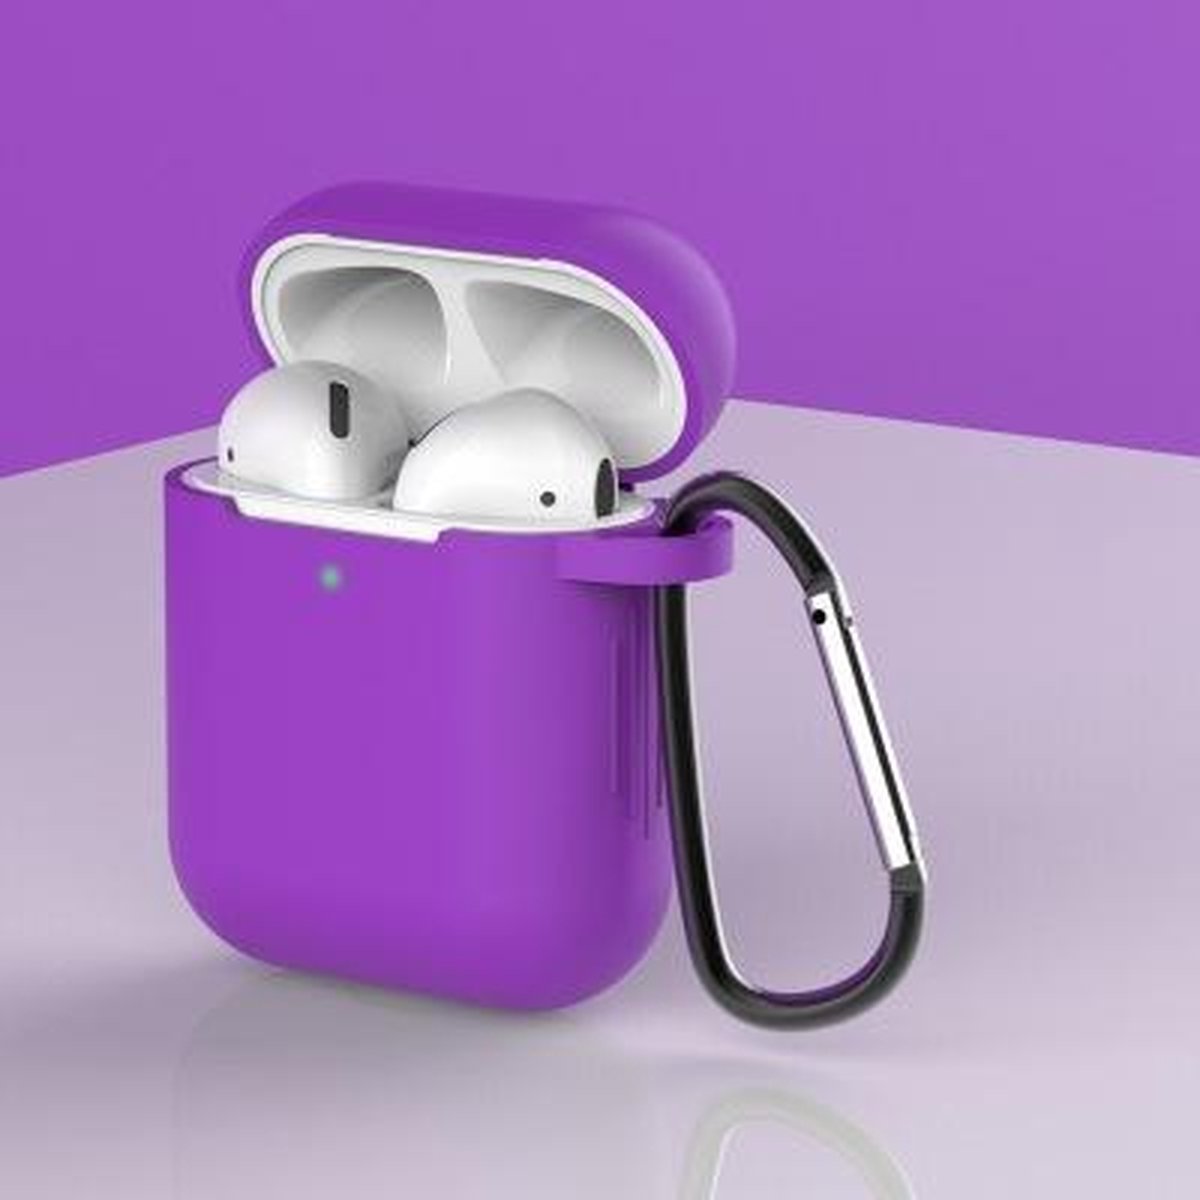 Apple AirPods 1/2 Hoesje + Clip in het donker paars - Siliconen - Case - Cover - Soft case